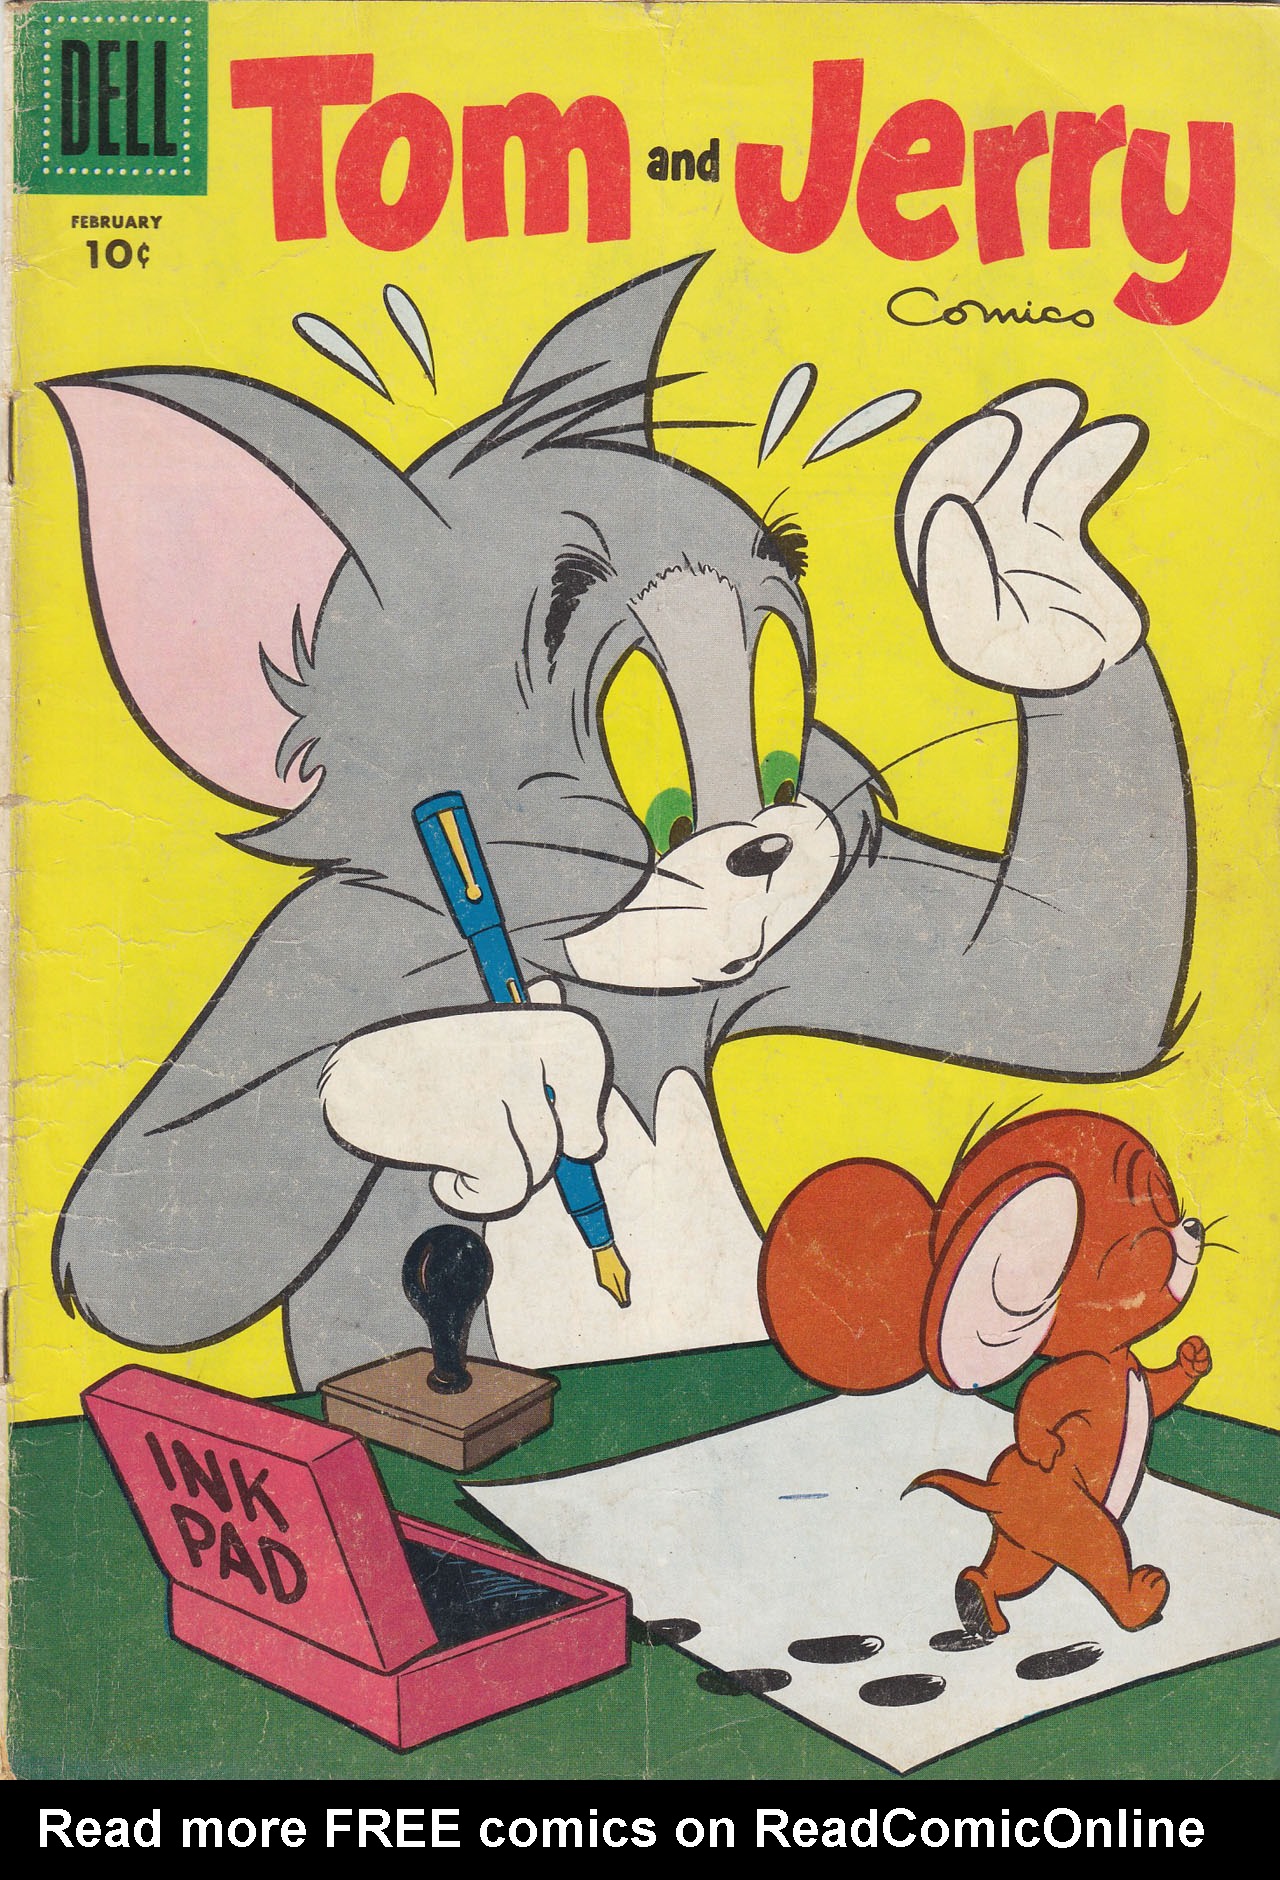 Tom Jerry Comics Issue 139 | Read Tom Jerry Comics Issue 139 comic online  in high quality. Read Full Comic online for free - Read comics online in  high quality .|